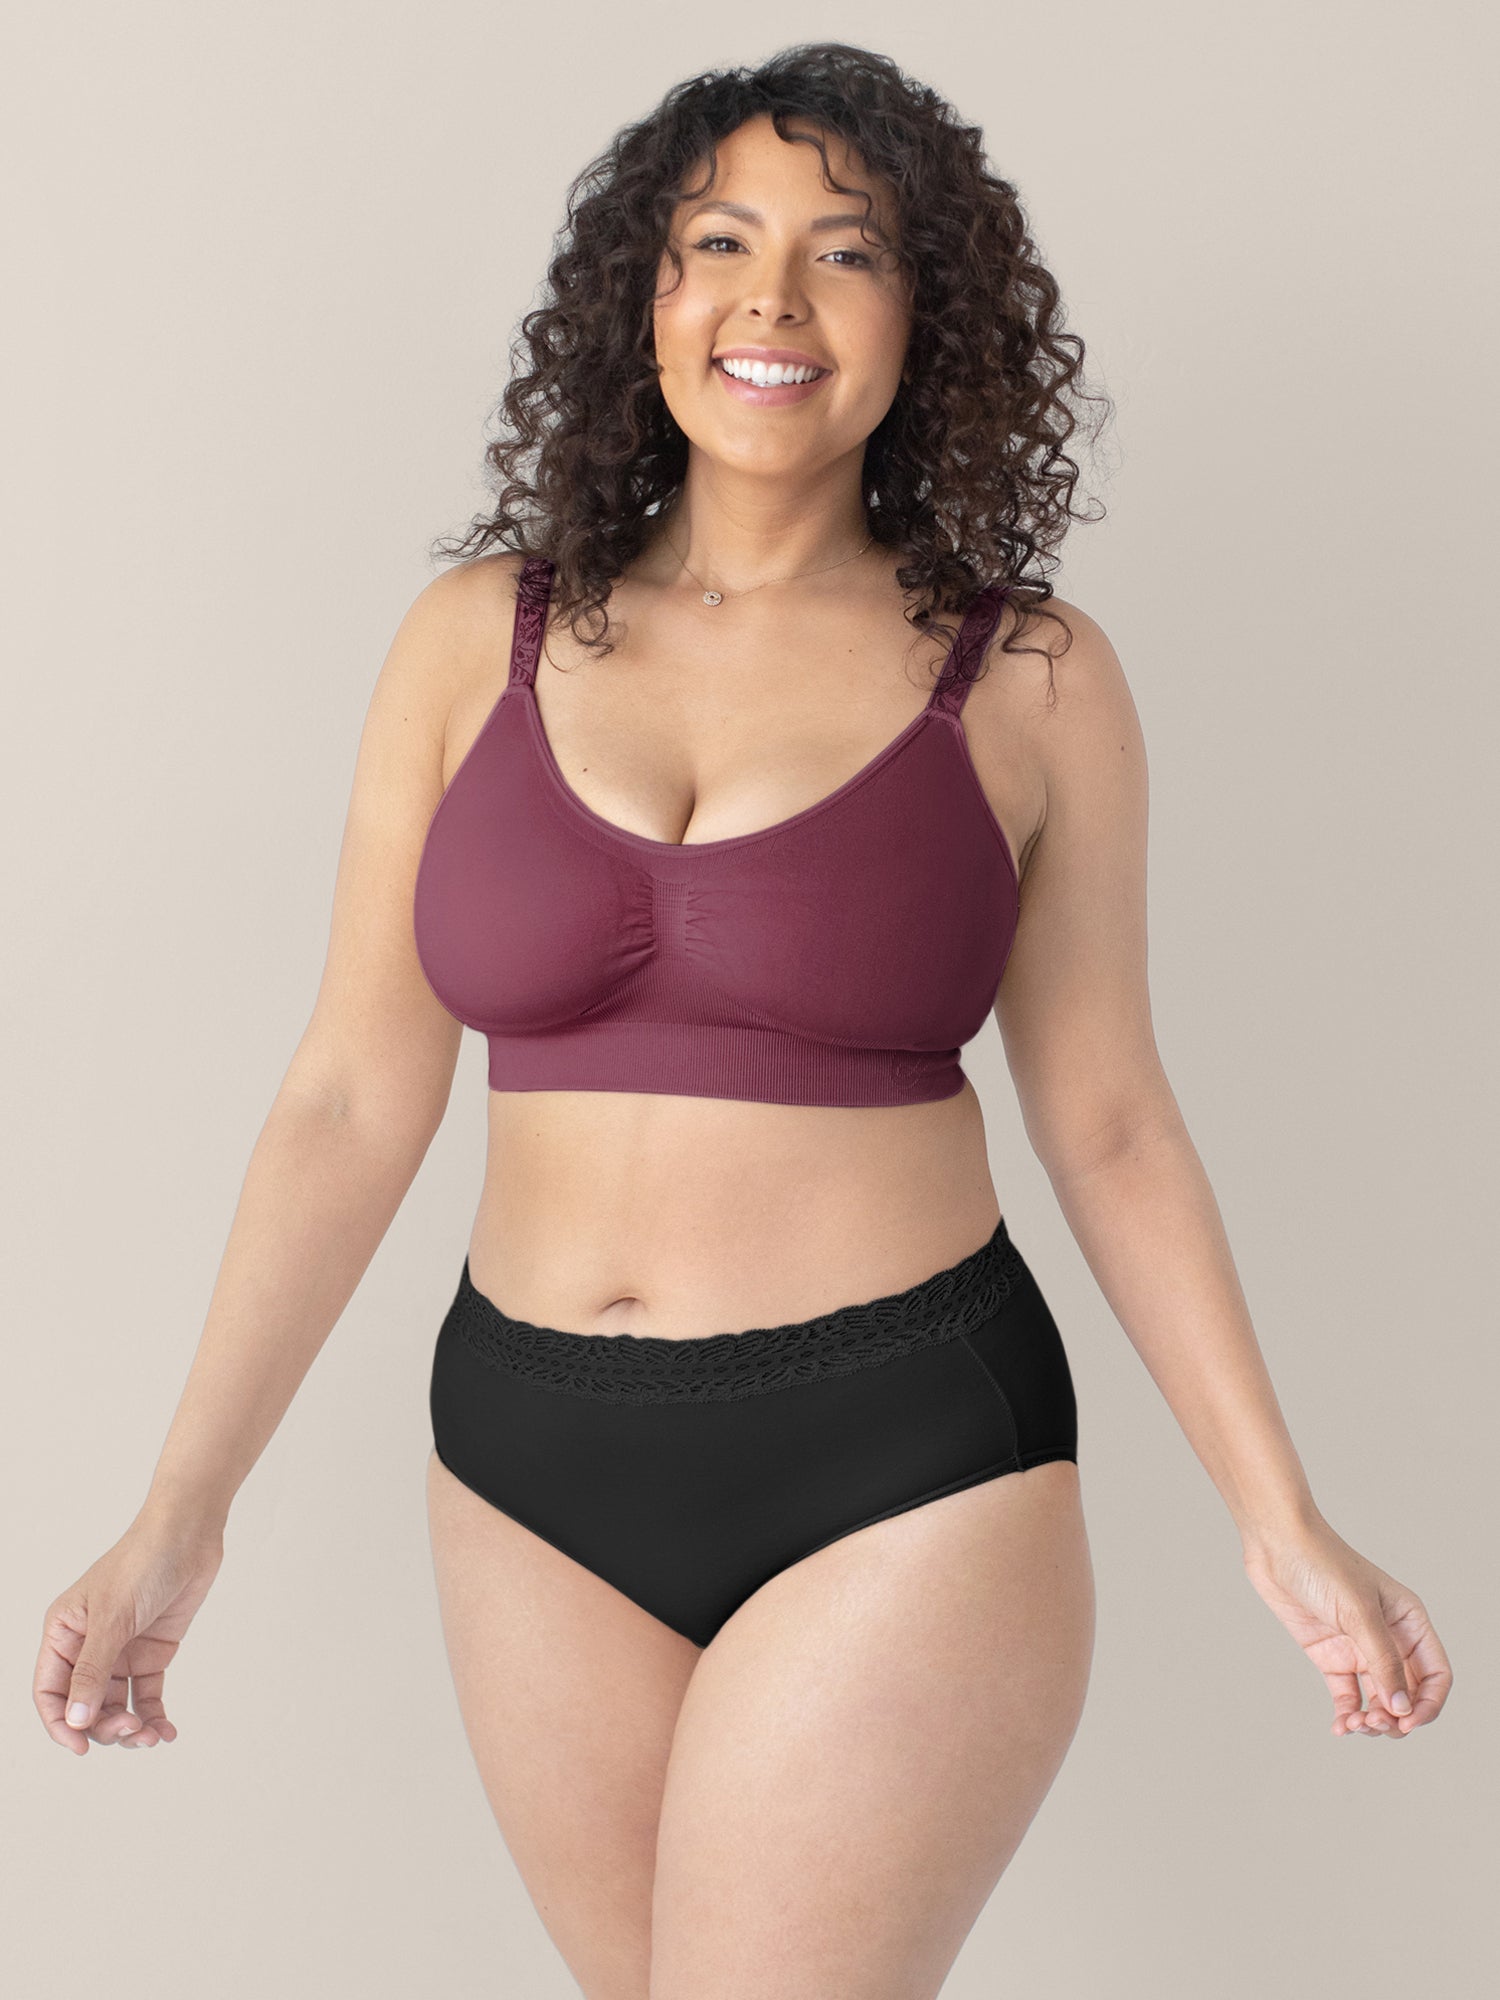 Davy Piper: Try Davy Piper, you will love your bra and how it fits/feels!